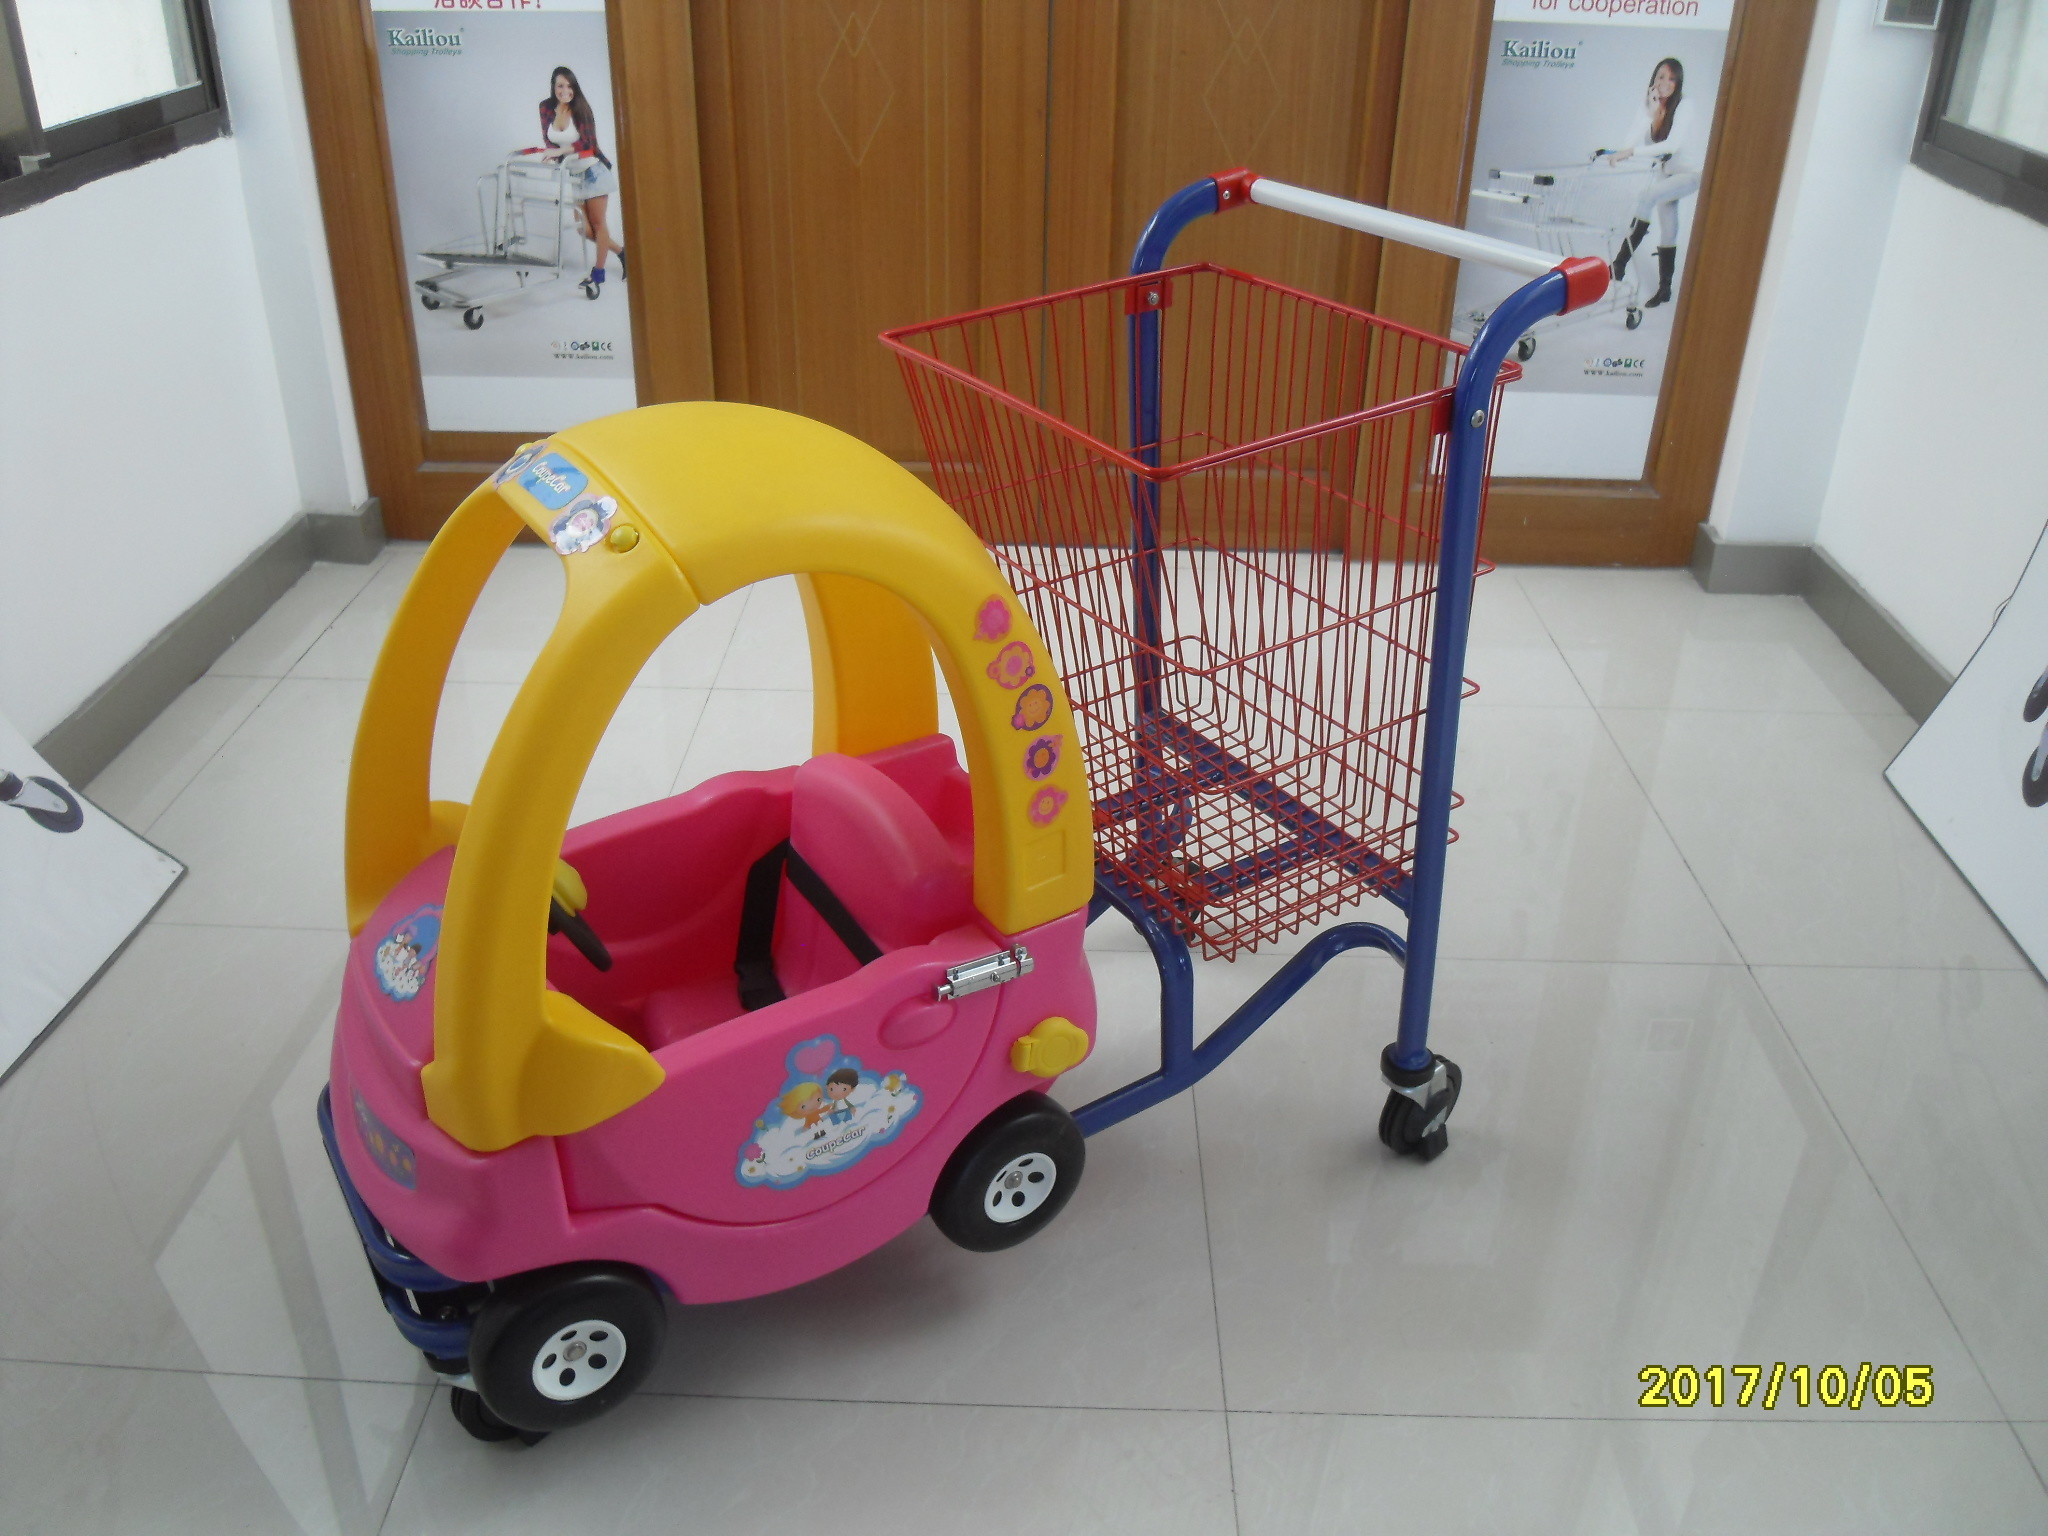 95L Low Carbon Steel / Plastic Children Shopping Cart With Red Powder Coating